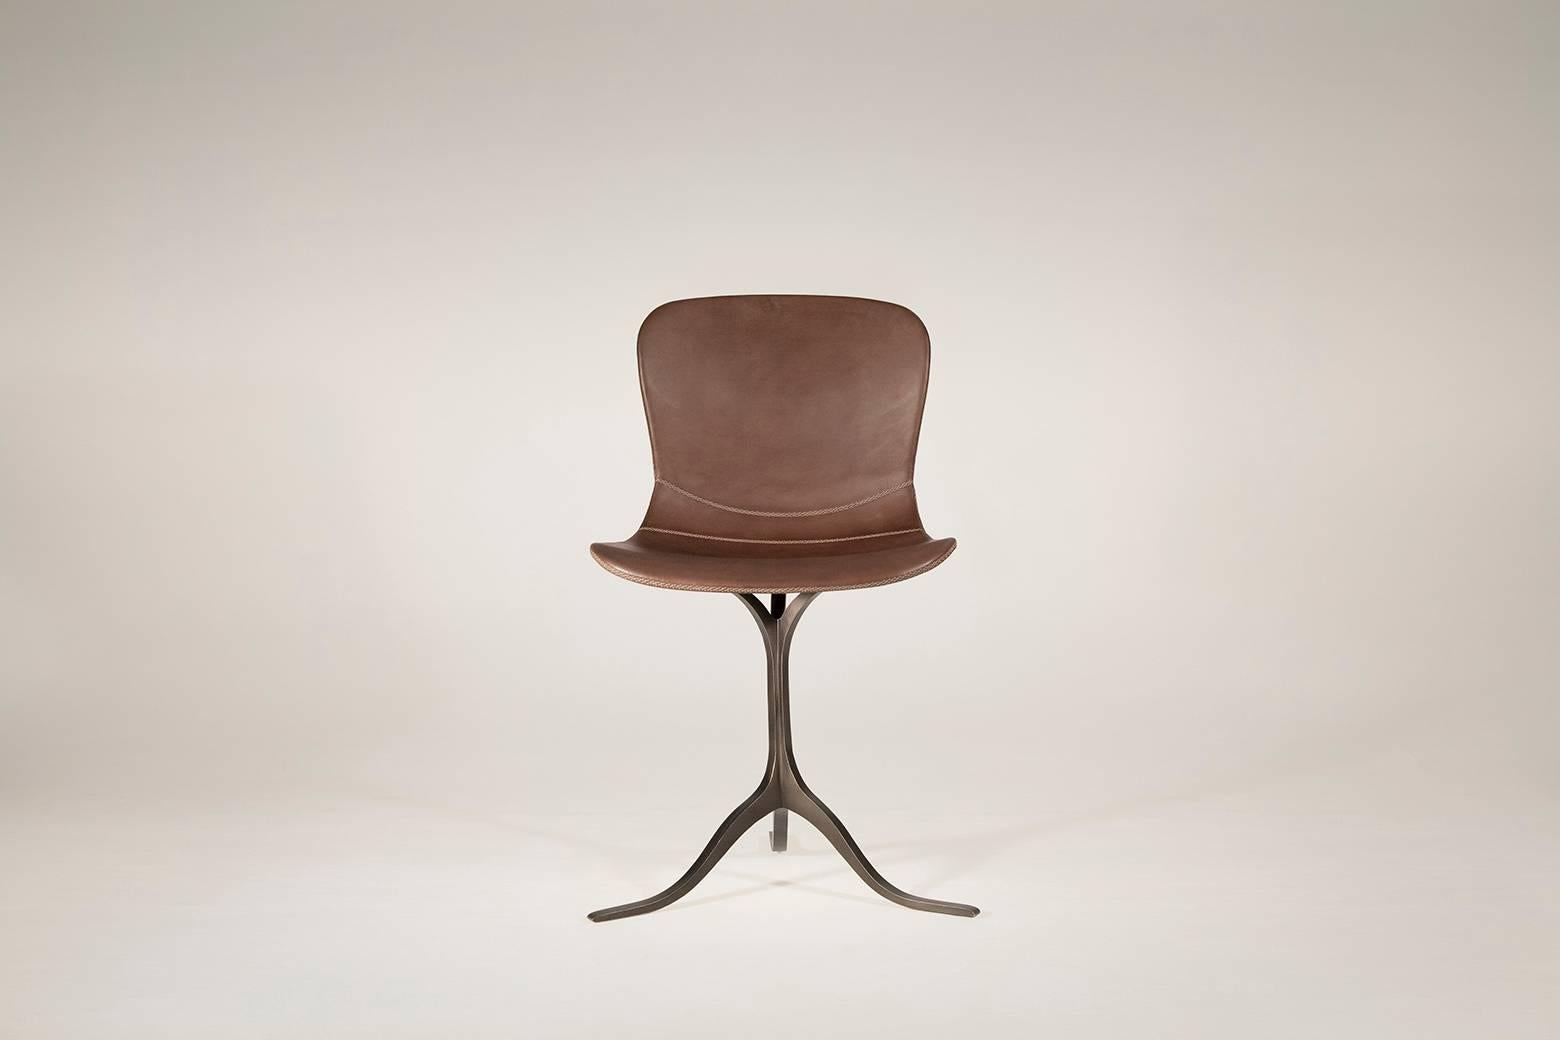 Model: PT40-DB-truffe
Seat: Leather
Seat color: DB-truffe
Base: PT40, sand cast brass
Base finish: Brushed charcoal
Dimensions: 52 x 50 x 78 cm; Seat height 46 cm
(W x D x H) 18.1 x 19.6 x 30.71 inch; Seat height 18.1 inch 

This is a